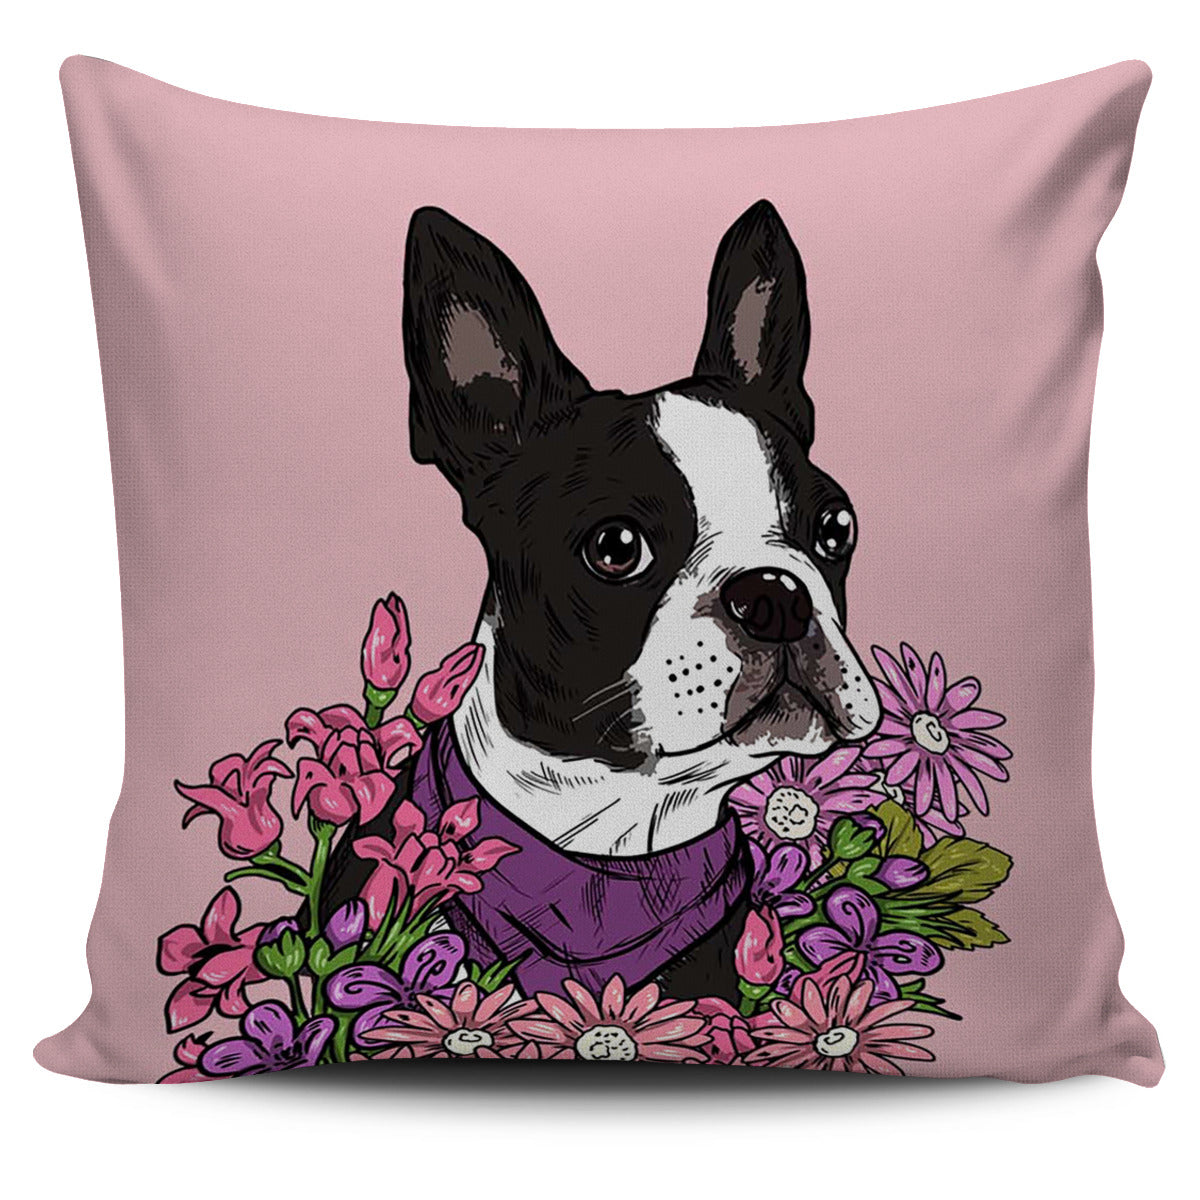 Illustrated Boston Terrier Pillow Cover